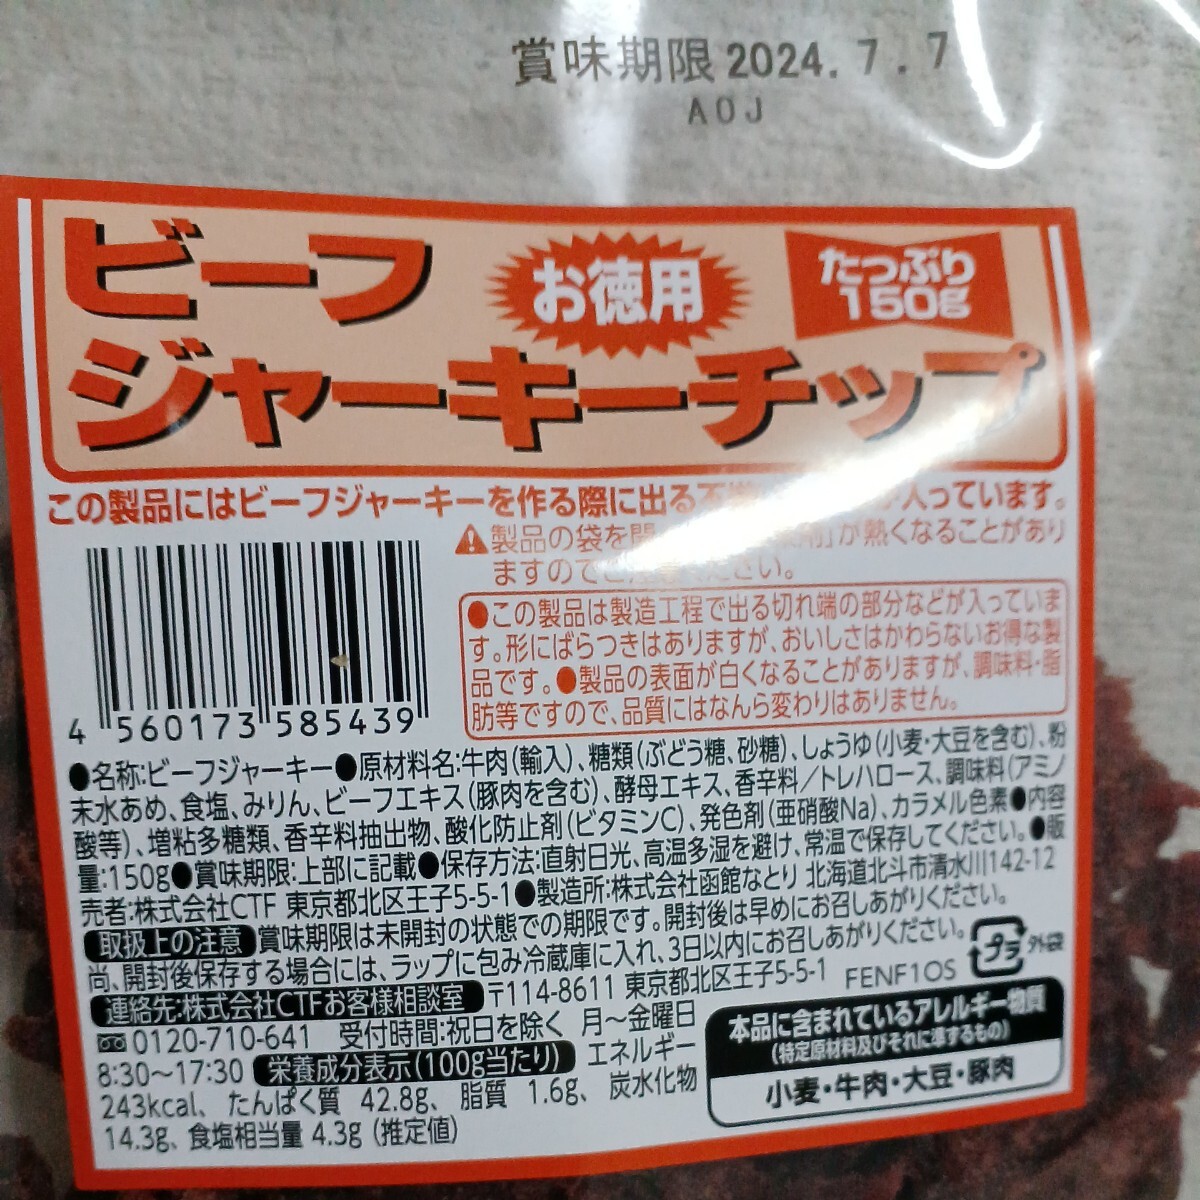  economical 150g...* beef jerky limited amount limited time ... peak beef jerky snack bite Event ultra rare 